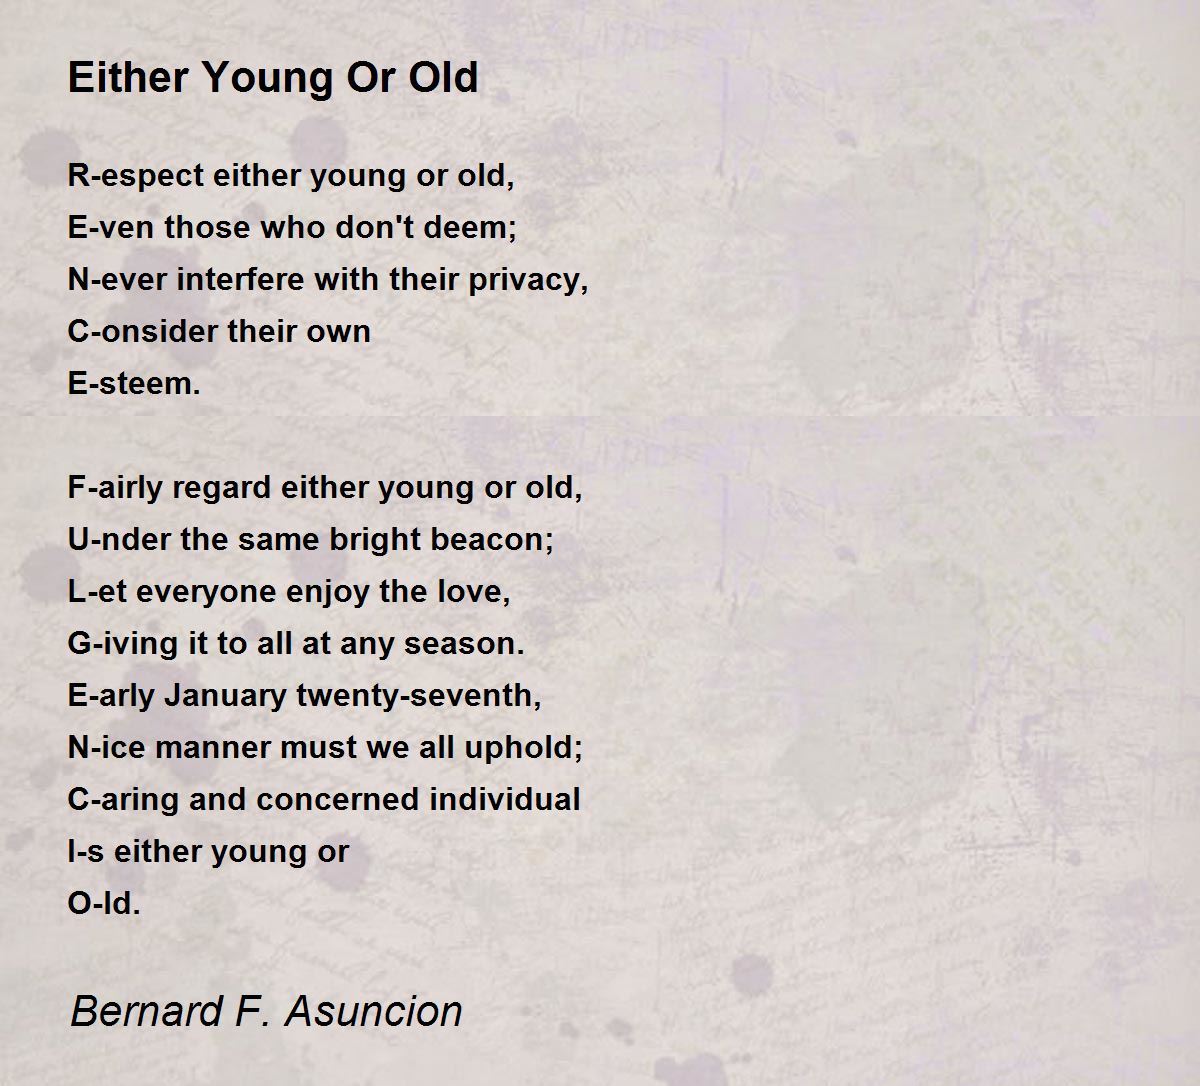 Either Young Or Old - Either Young Or Old Poem by Bernard F. Asuncion